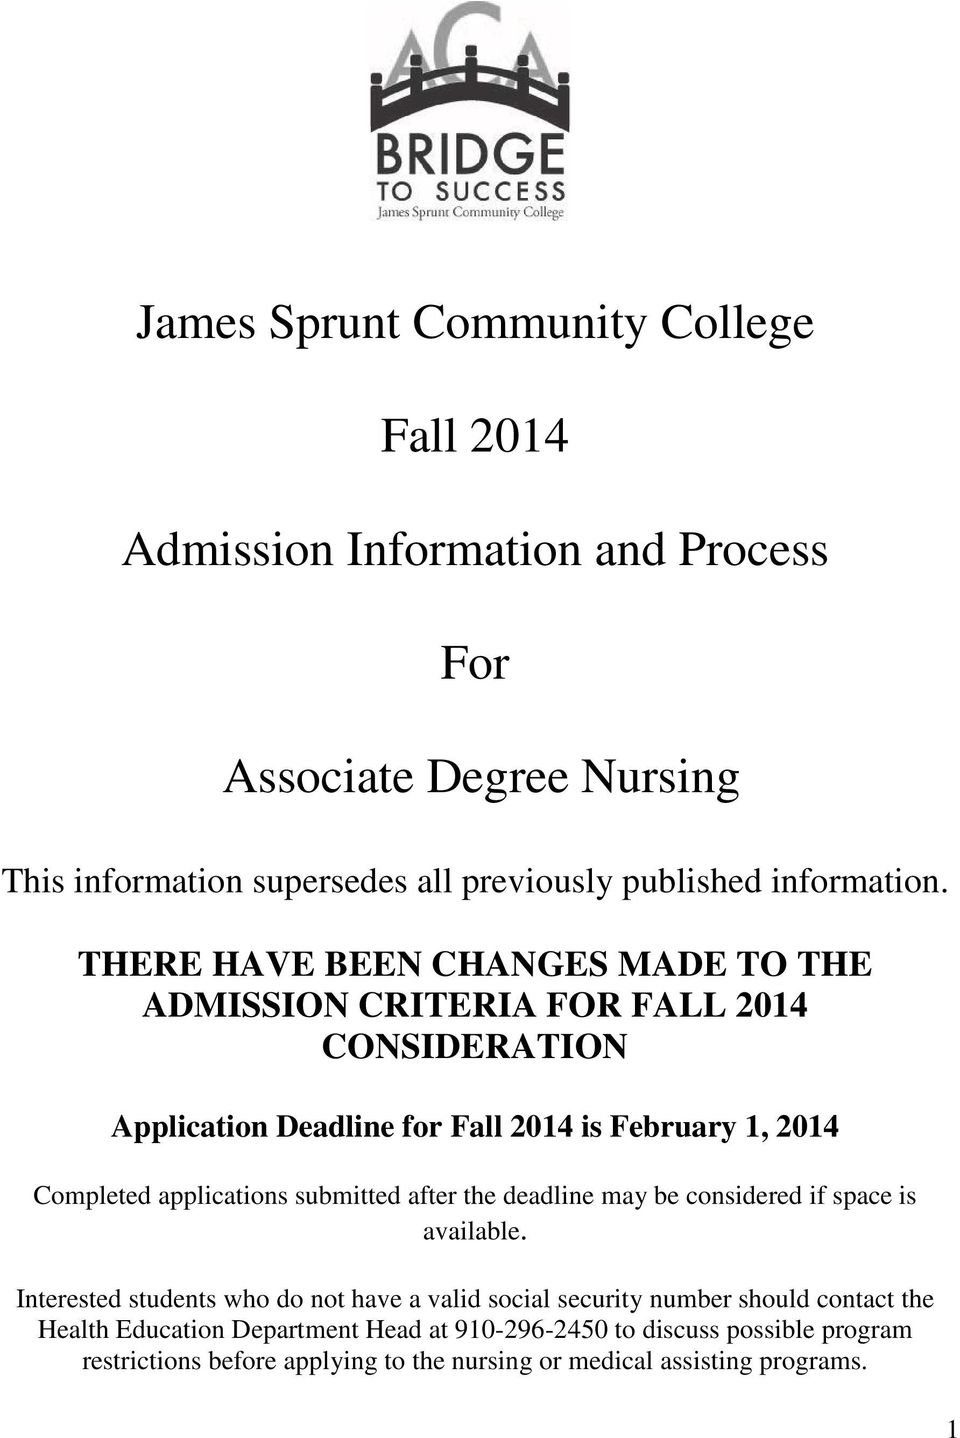 THERE HAVE BEEN CHANGES MADE TO THE ADMISSION CRITERIA FOR FALL 2014 CONSIDERATION Application Deadline for Fall 2014 is February 1, 2014 Completed